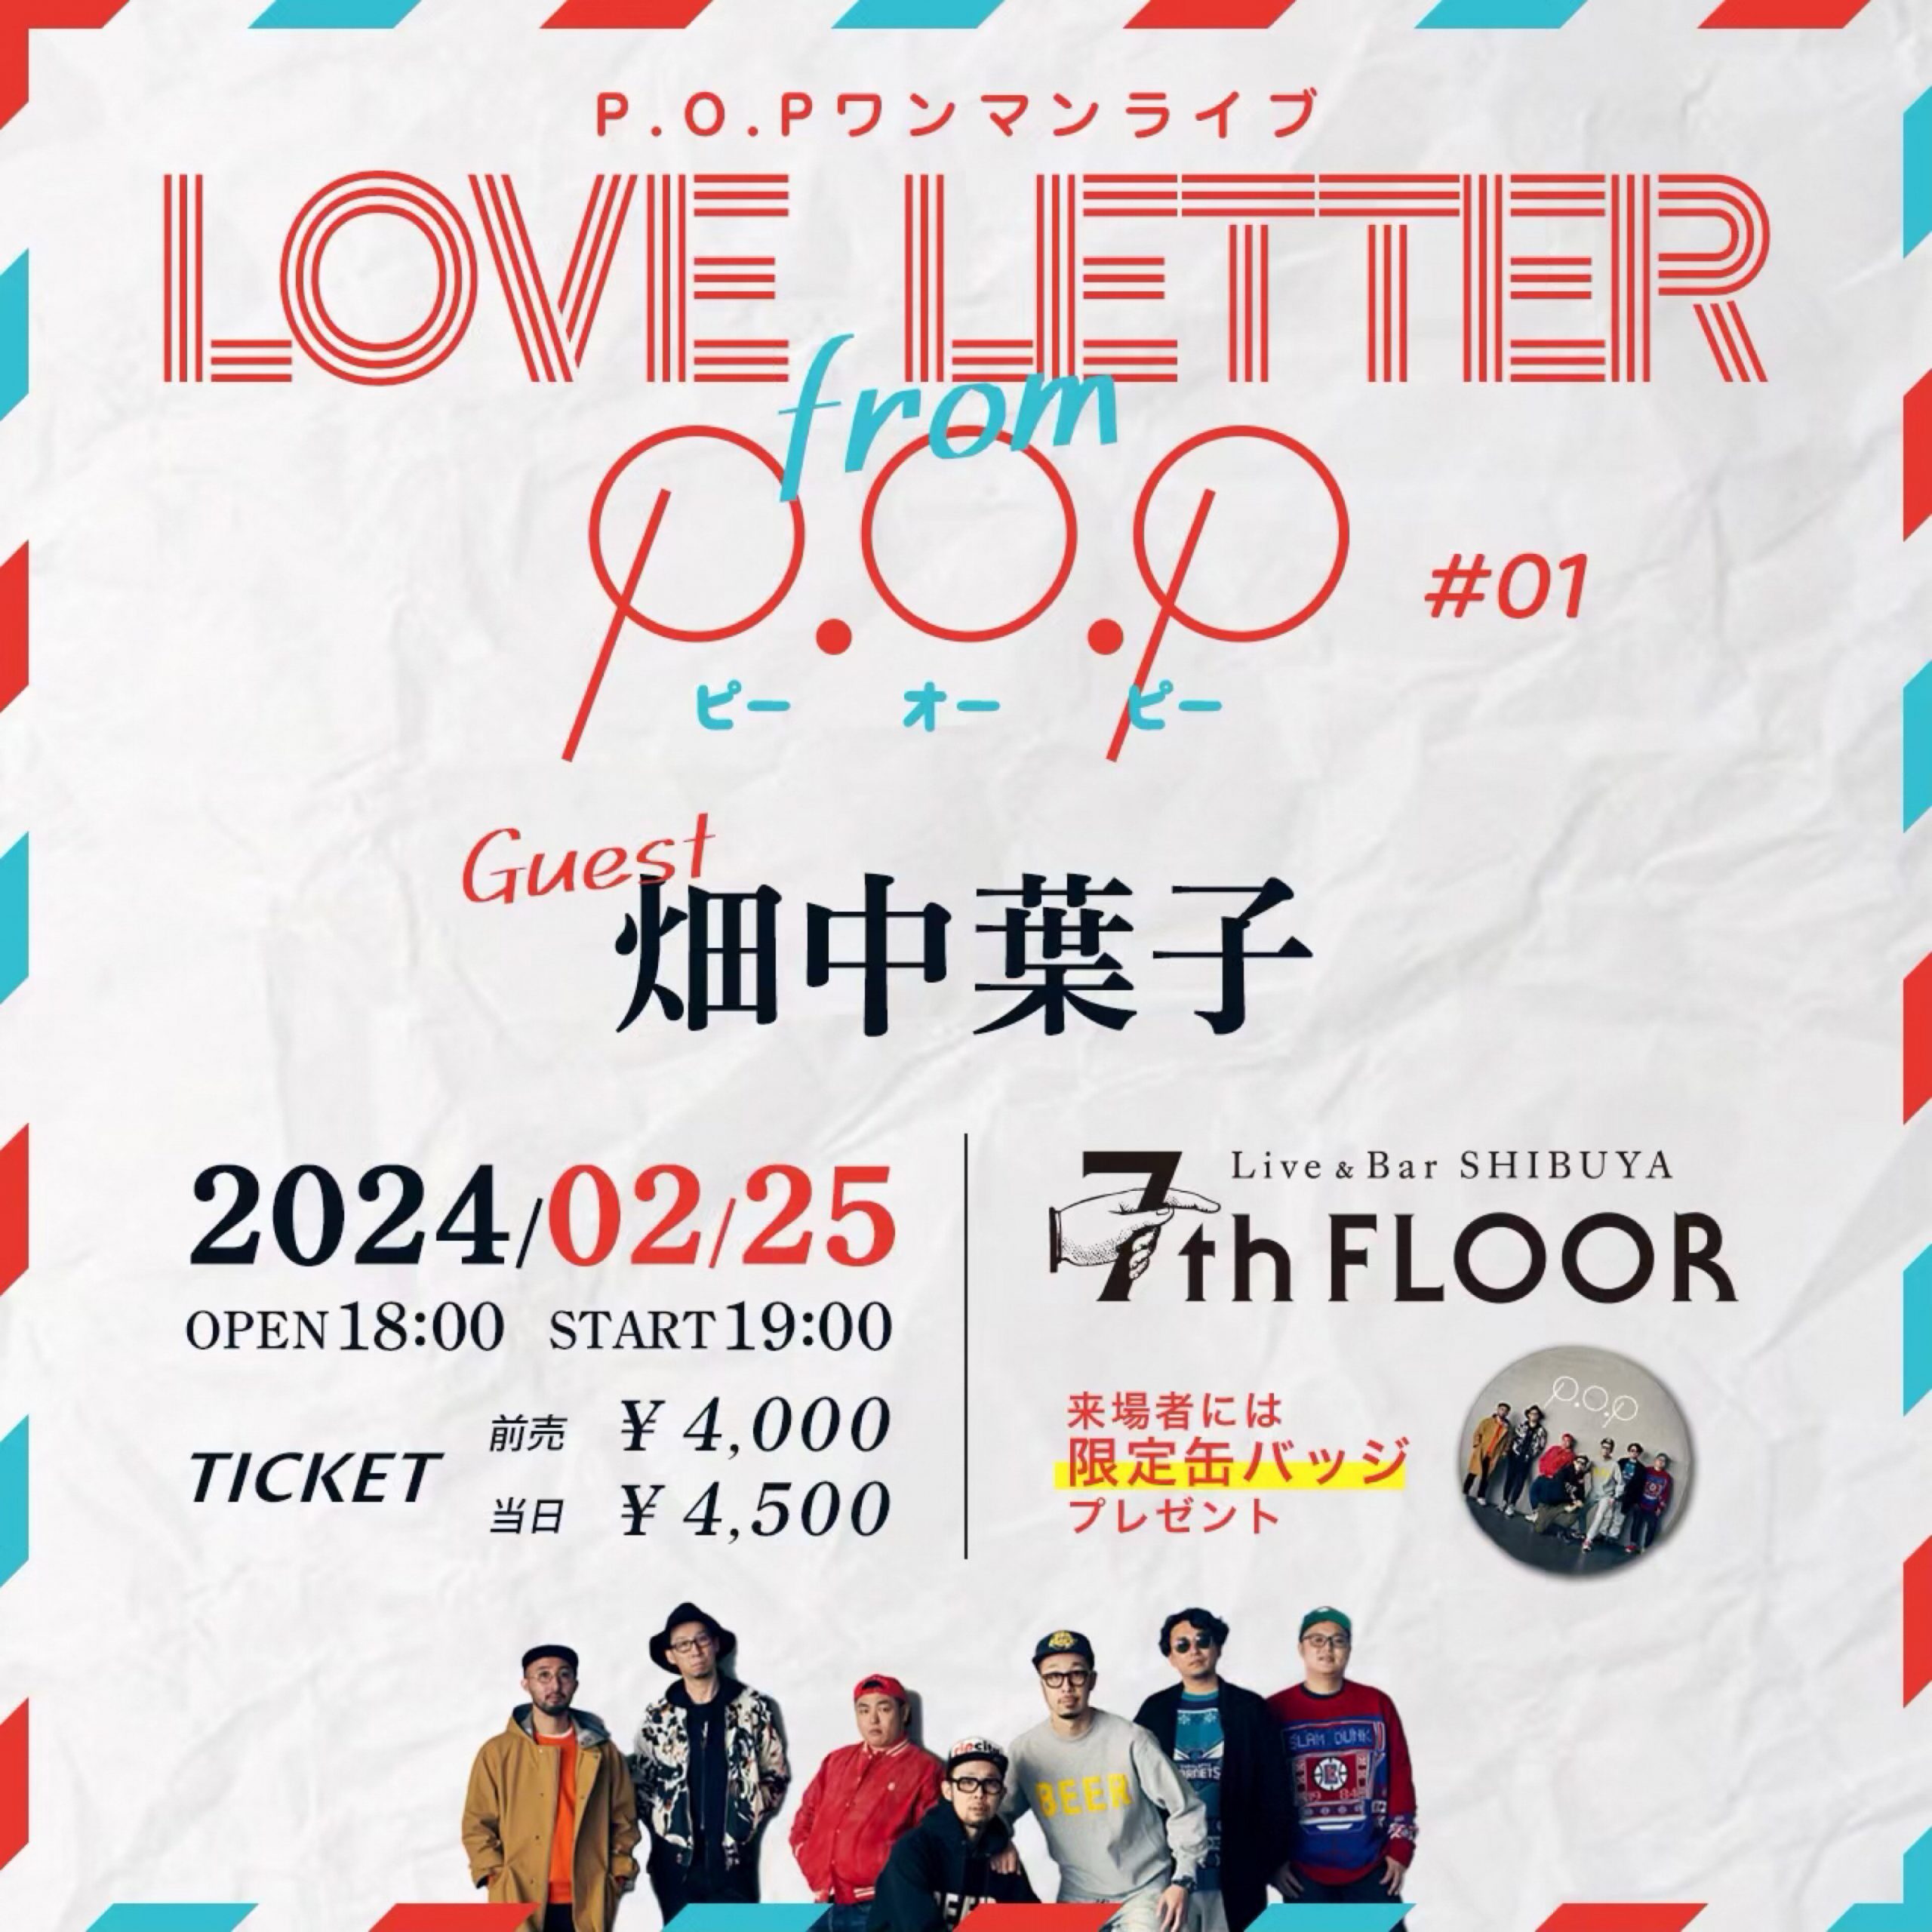 LOVE LETTER from P.O.P #01